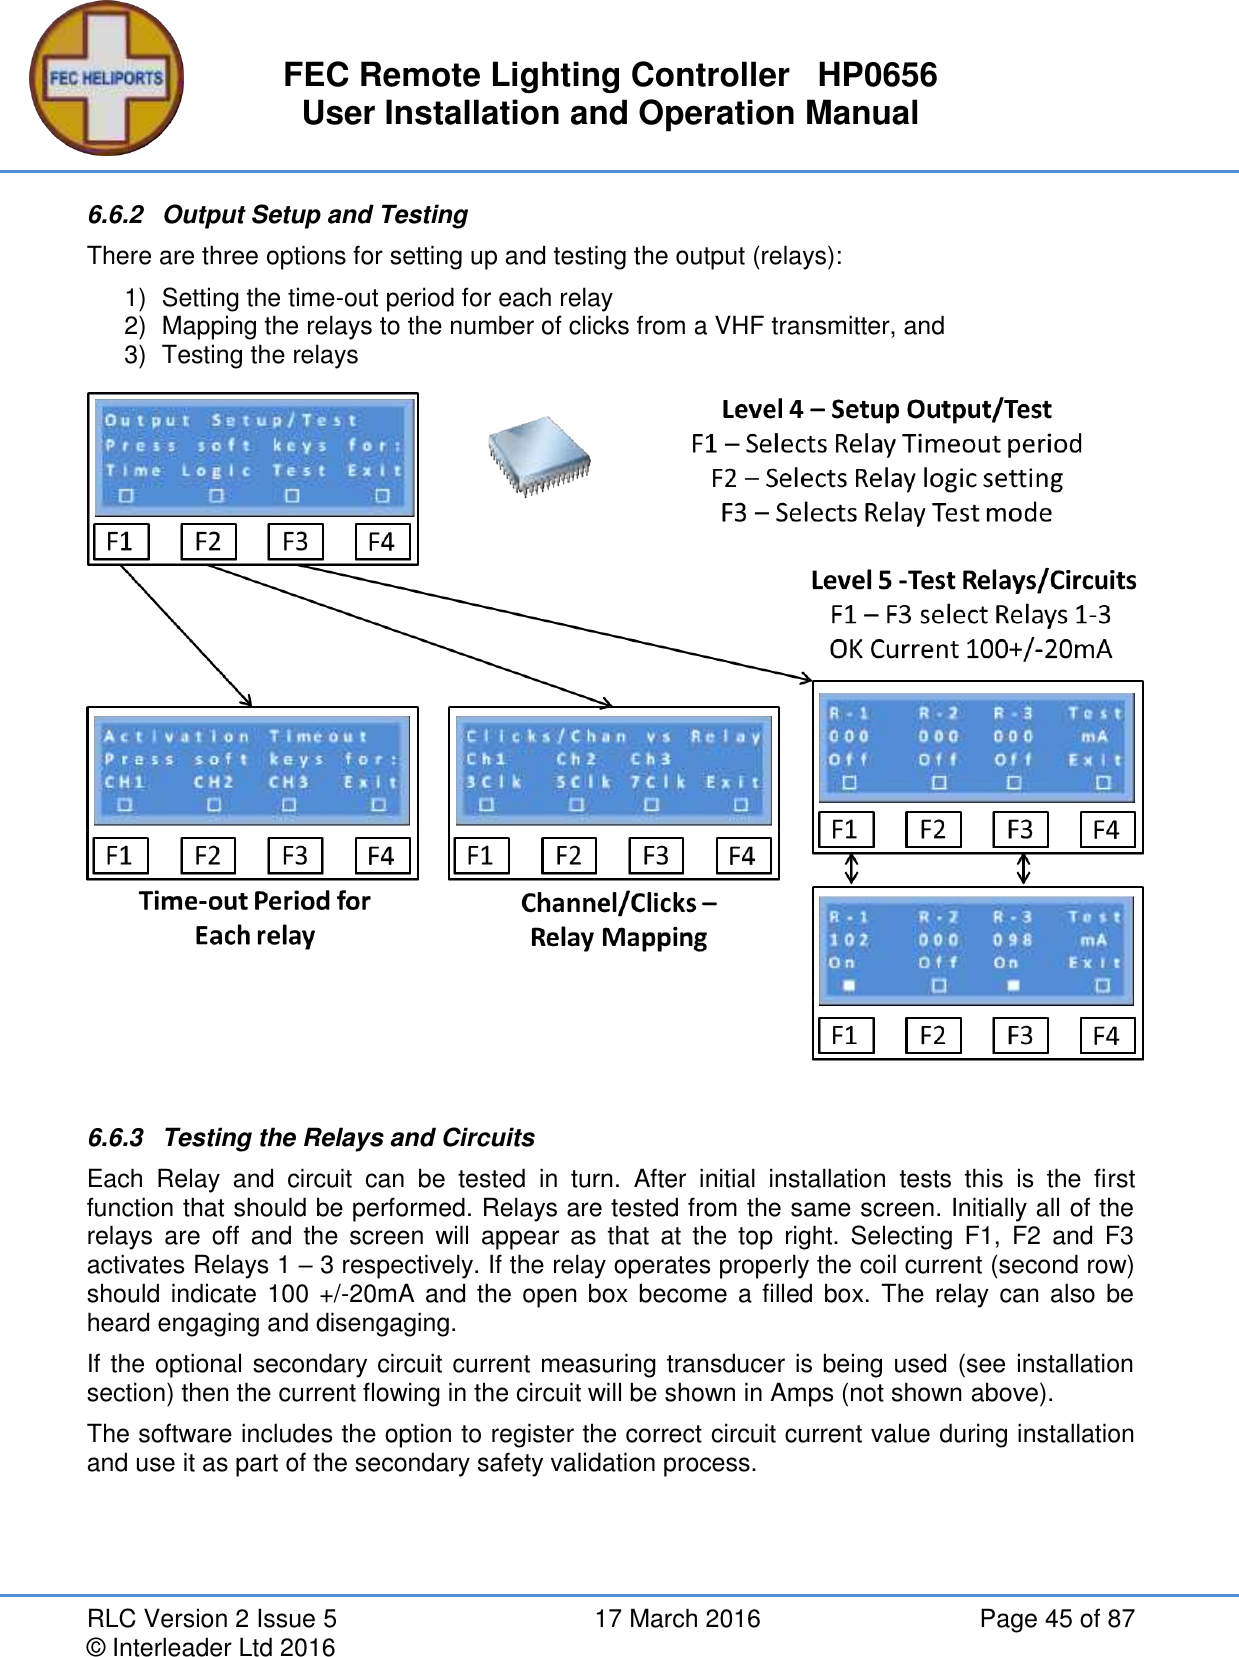 FEC Remote Lighting Controller   HP0656 User Installation and Operation Manual RLC Version 2 Issue 5  17 March 2016  Page 45 of 87 © Interleader Ltd 2016 6.6.2  Output Setup and Testing There are three options for setting up and testing the output (relays): 1)  Setting the time-out period for each relay 2)  Mapping the relays to the number of clicks from a VHF transmitter, and 3)  Testing the relays   6.6.3  Testing the Relays and Circuits Each  Relay  and  circuit  can  be  tested  in  turn.  After  initial  installation  tests  this  is  the  first function that should be performed. Relays are tested from the same screen. Initially all of the relays  are  off  and  the  screen  will appear  as  that  at  the  top  right.  Selecting  F1,  F2  and F3 activates Relays 1 – 3 respectively. If the relay operates properly the coil current (second row) should indicate 100 +/-20mA and the open box become a filled box. The relay can also be heard engaging and disengaging.  If the optional secondary circuit current measuring transducer is being used (see installation section) then the current flowing in the circuit will be shown in Amps (not shown above). The software includes the option to register the correct circuit current value during installation and use it as part of the secondary safety validation process.   